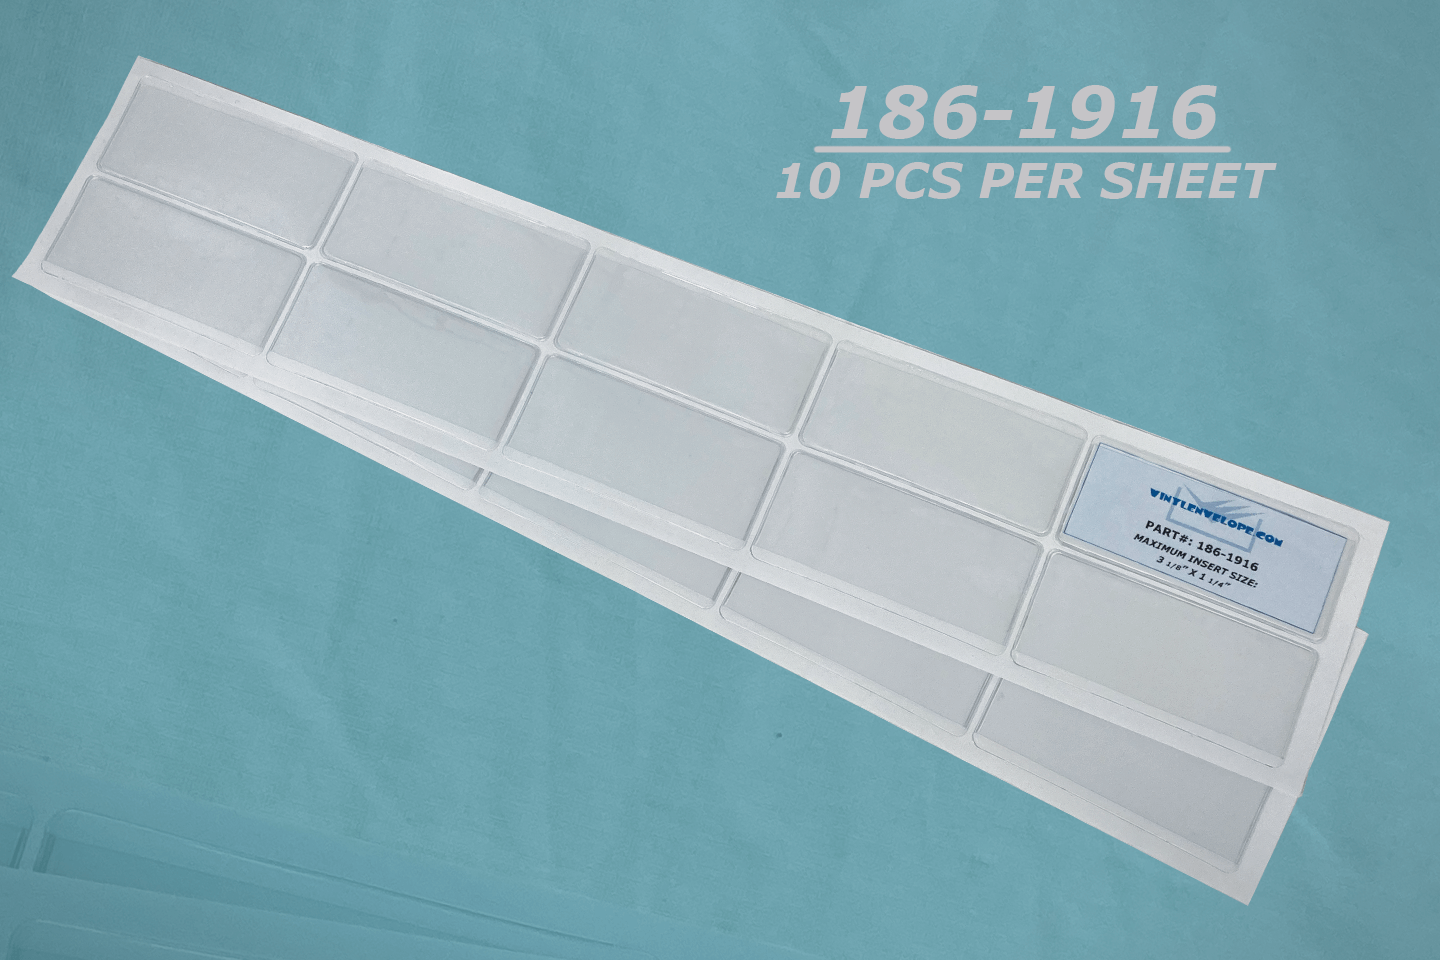 3 3/8" X 1 1/2" Adhesive Pouch